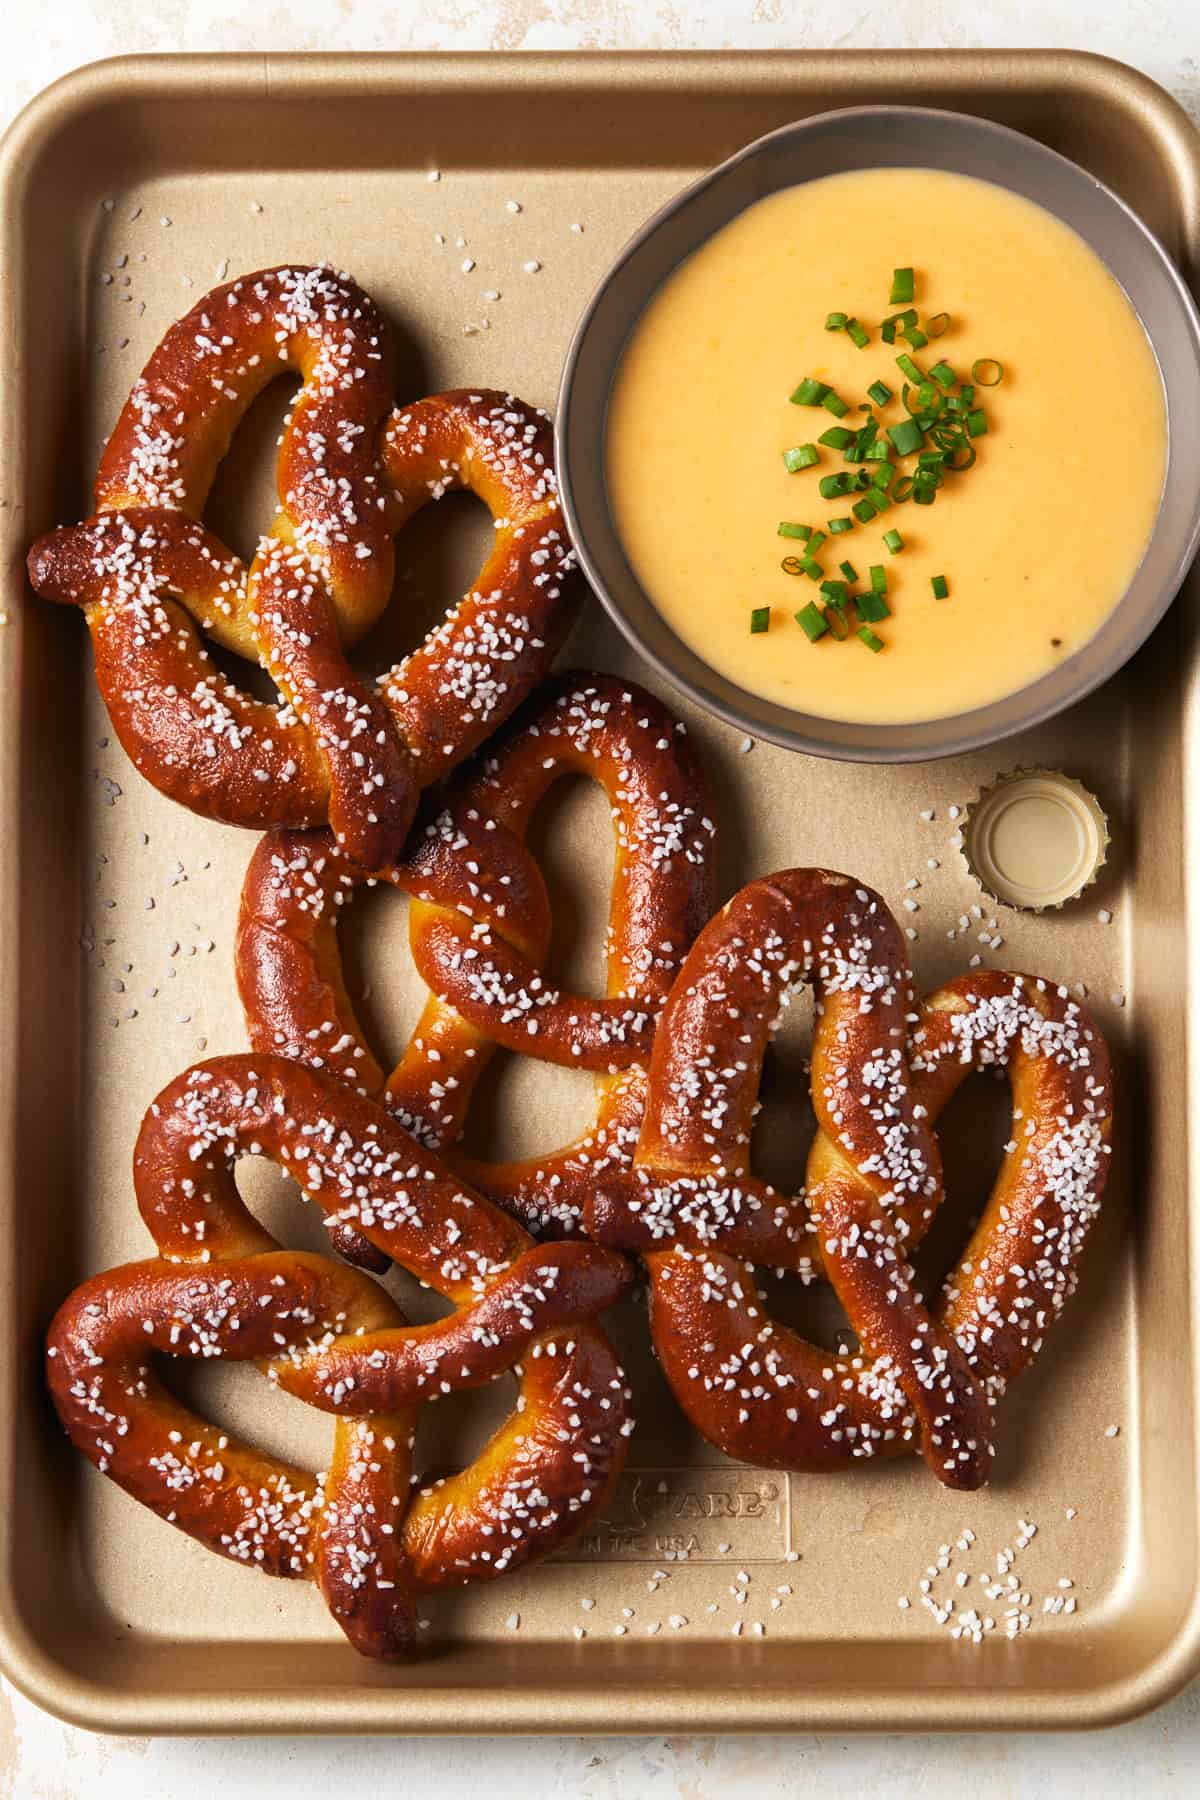 Bowl of cheese dip and soft baked pretzels with salt on tray.